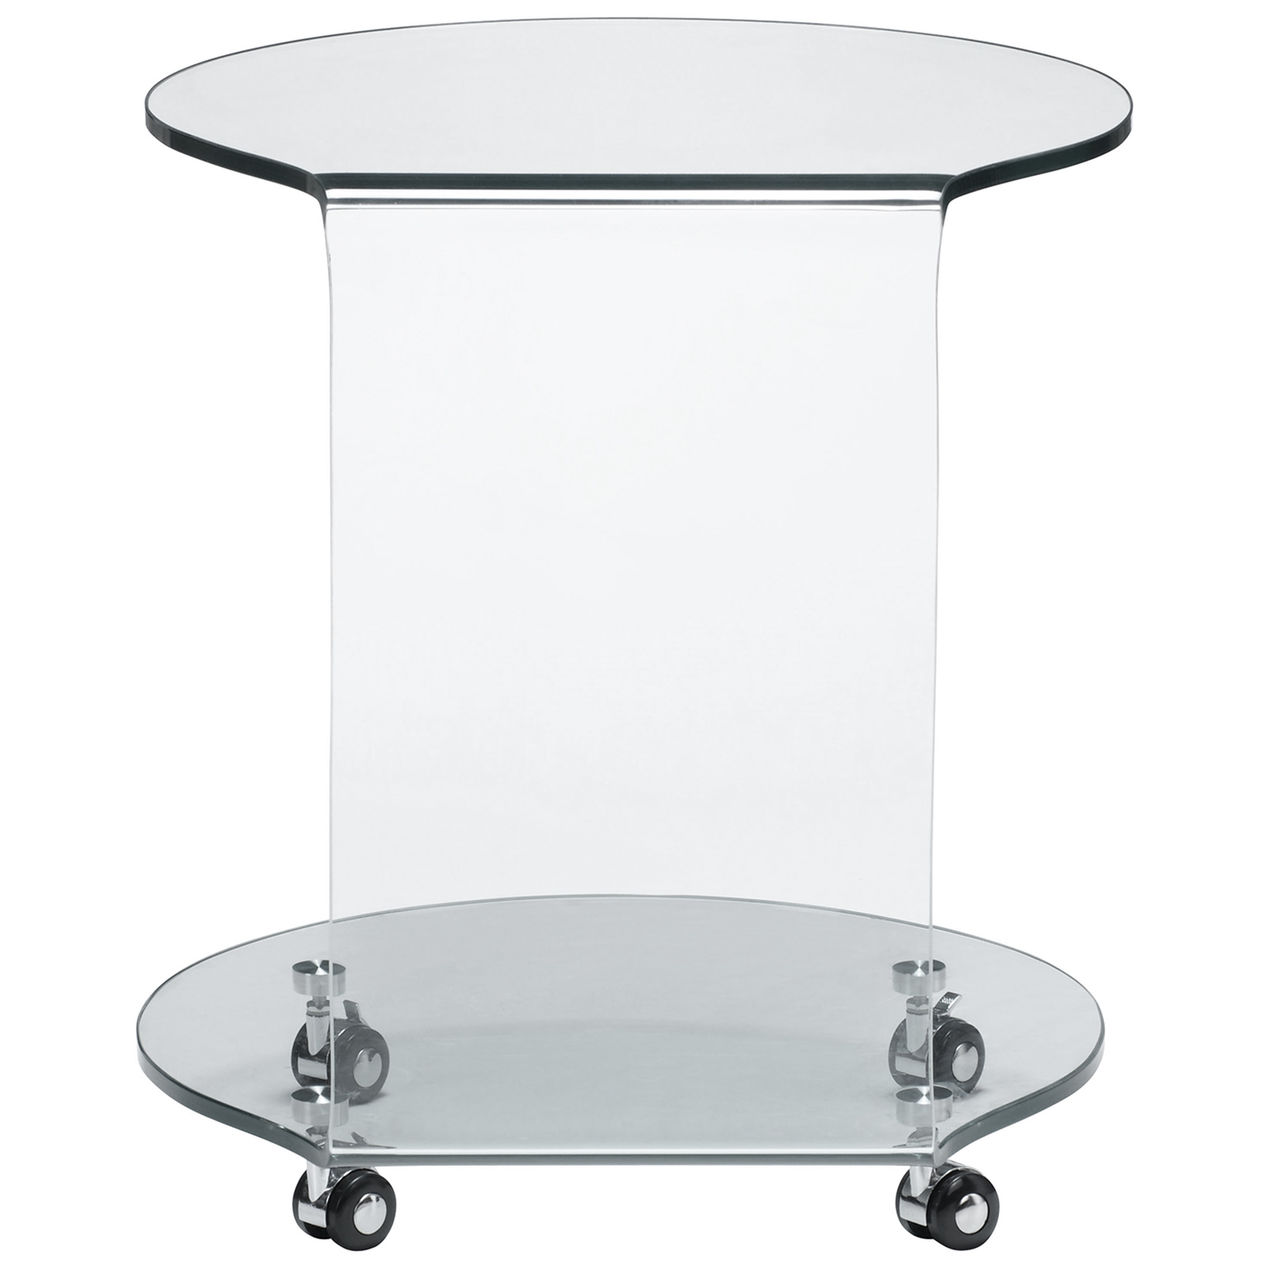 clear glass side table home lorelei accent affordable modern furniture tall with stools patio and outdoor small round drawer grey coffee set astoria piece chair thin console cloth